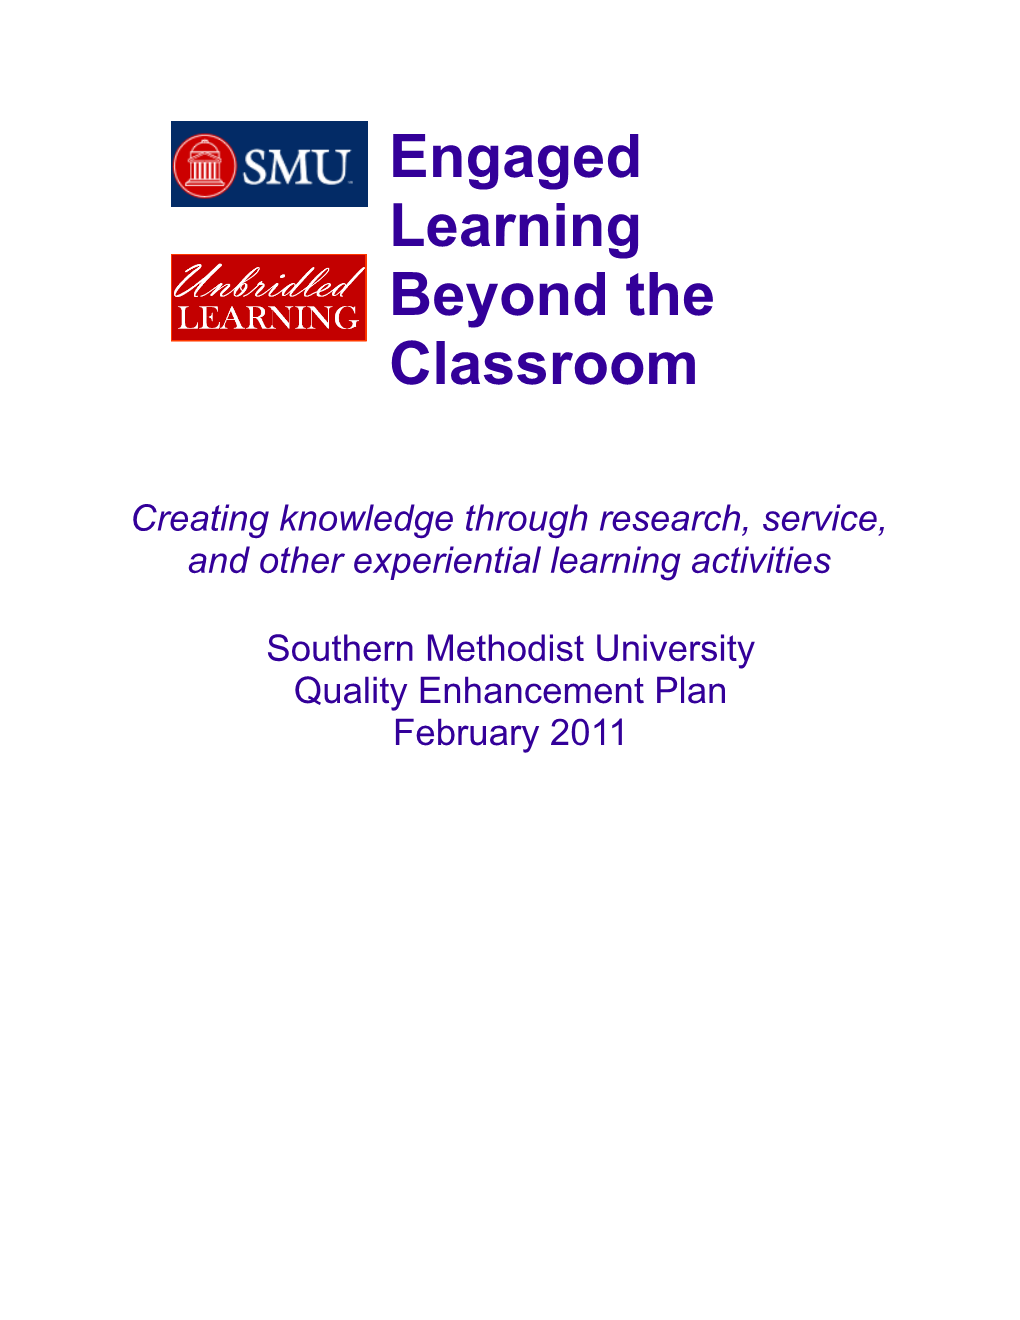 Creating Knowledge Through Research, Service, and Other Experiential Learning Activities